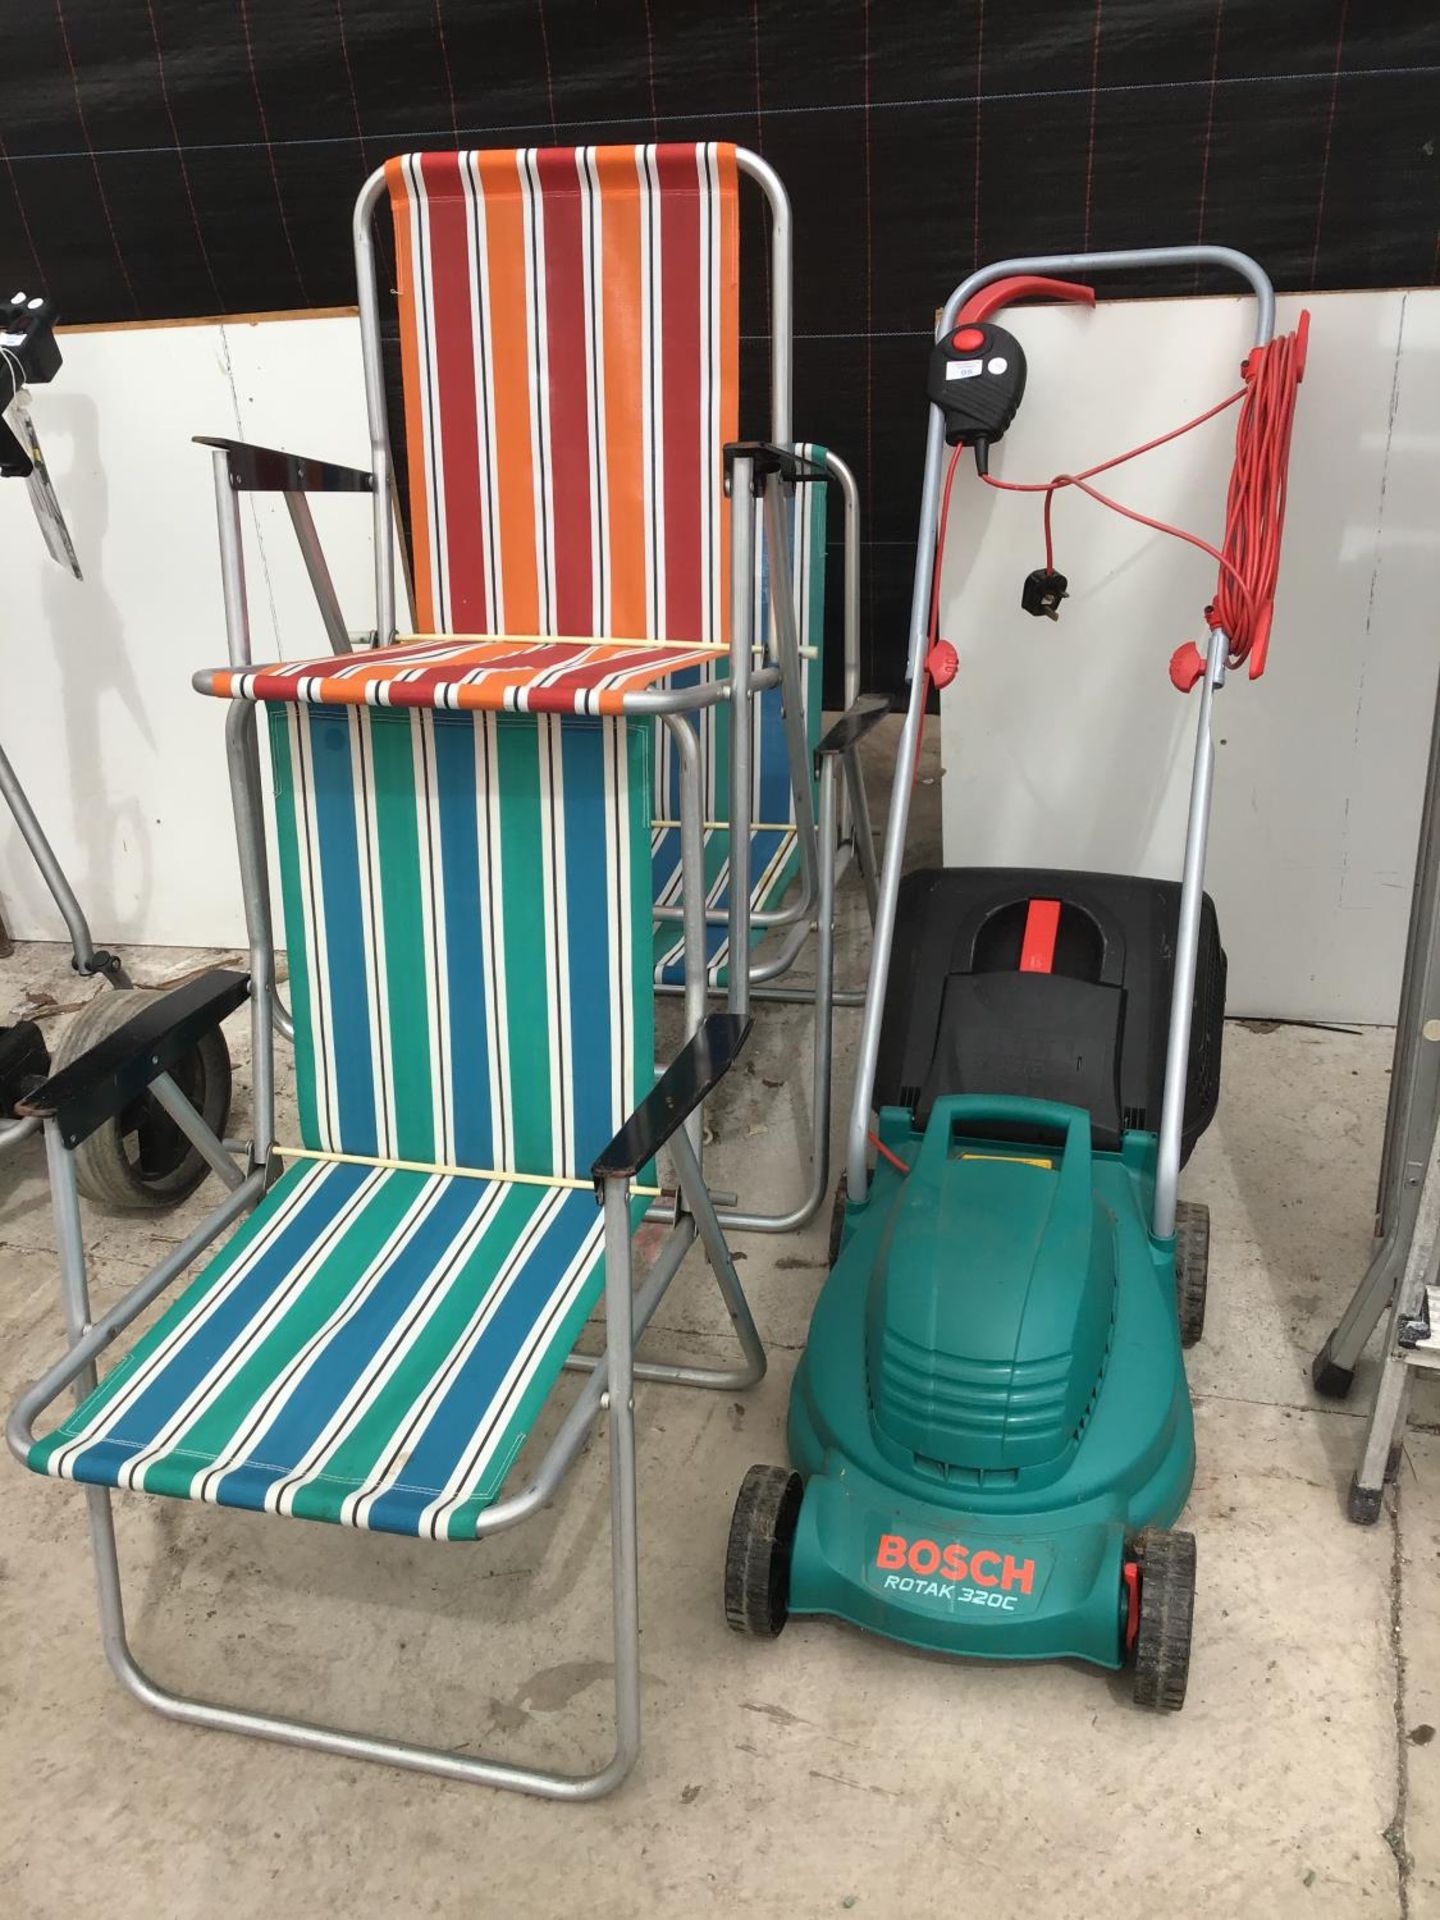 A BOSCH ROTAK 360 ELECTRIC LAWN MOWER IN WORKING ORDER AND THREE VINTAGE STRIPED FOLDING DECK CHAIRS